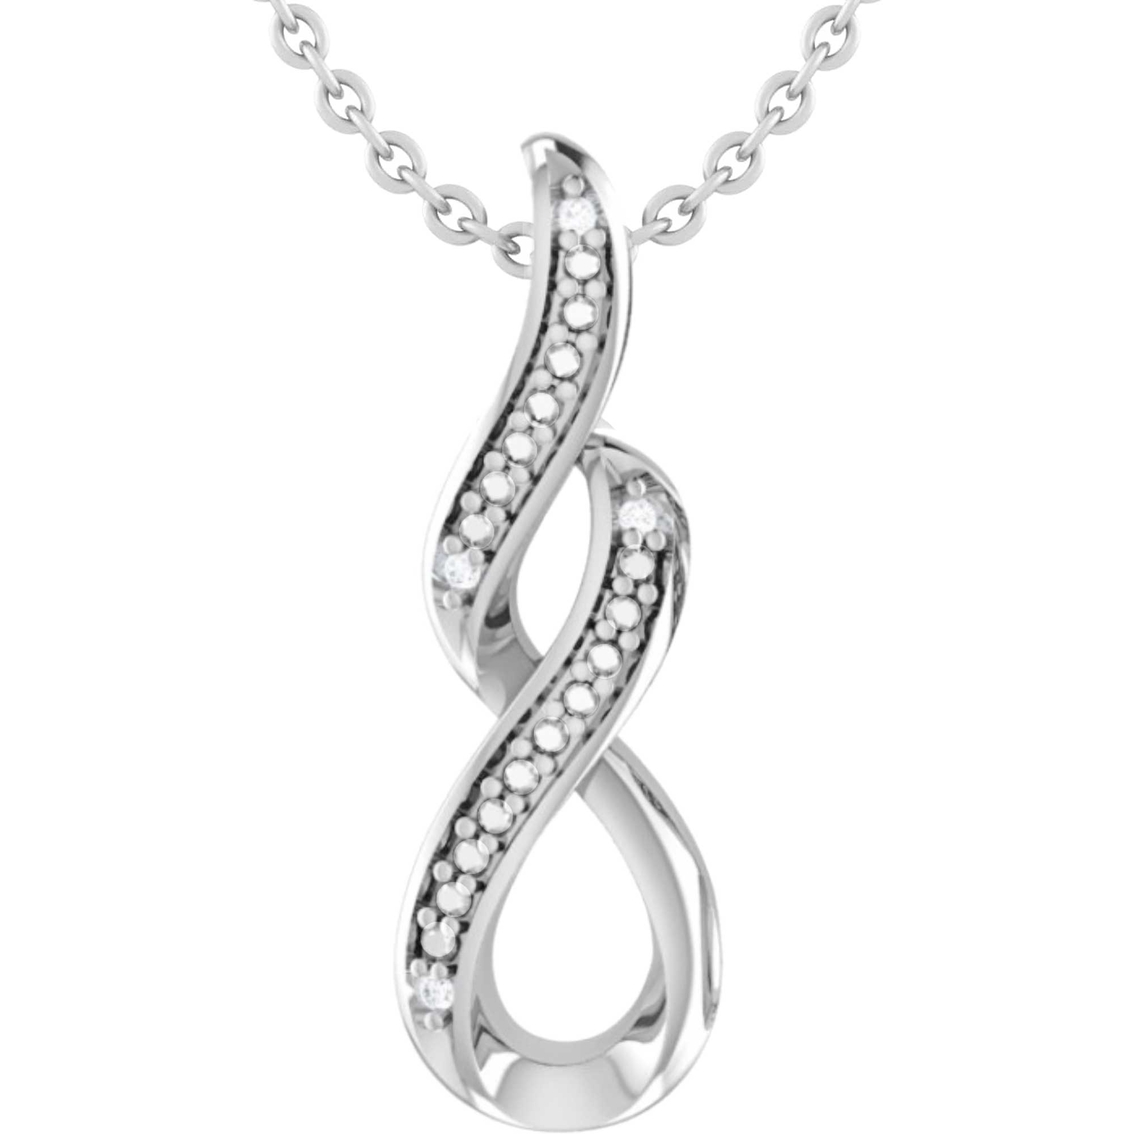 Sterling Silver Diamond Accent Swirl Earring and Pendant Set - Image 3 of 4